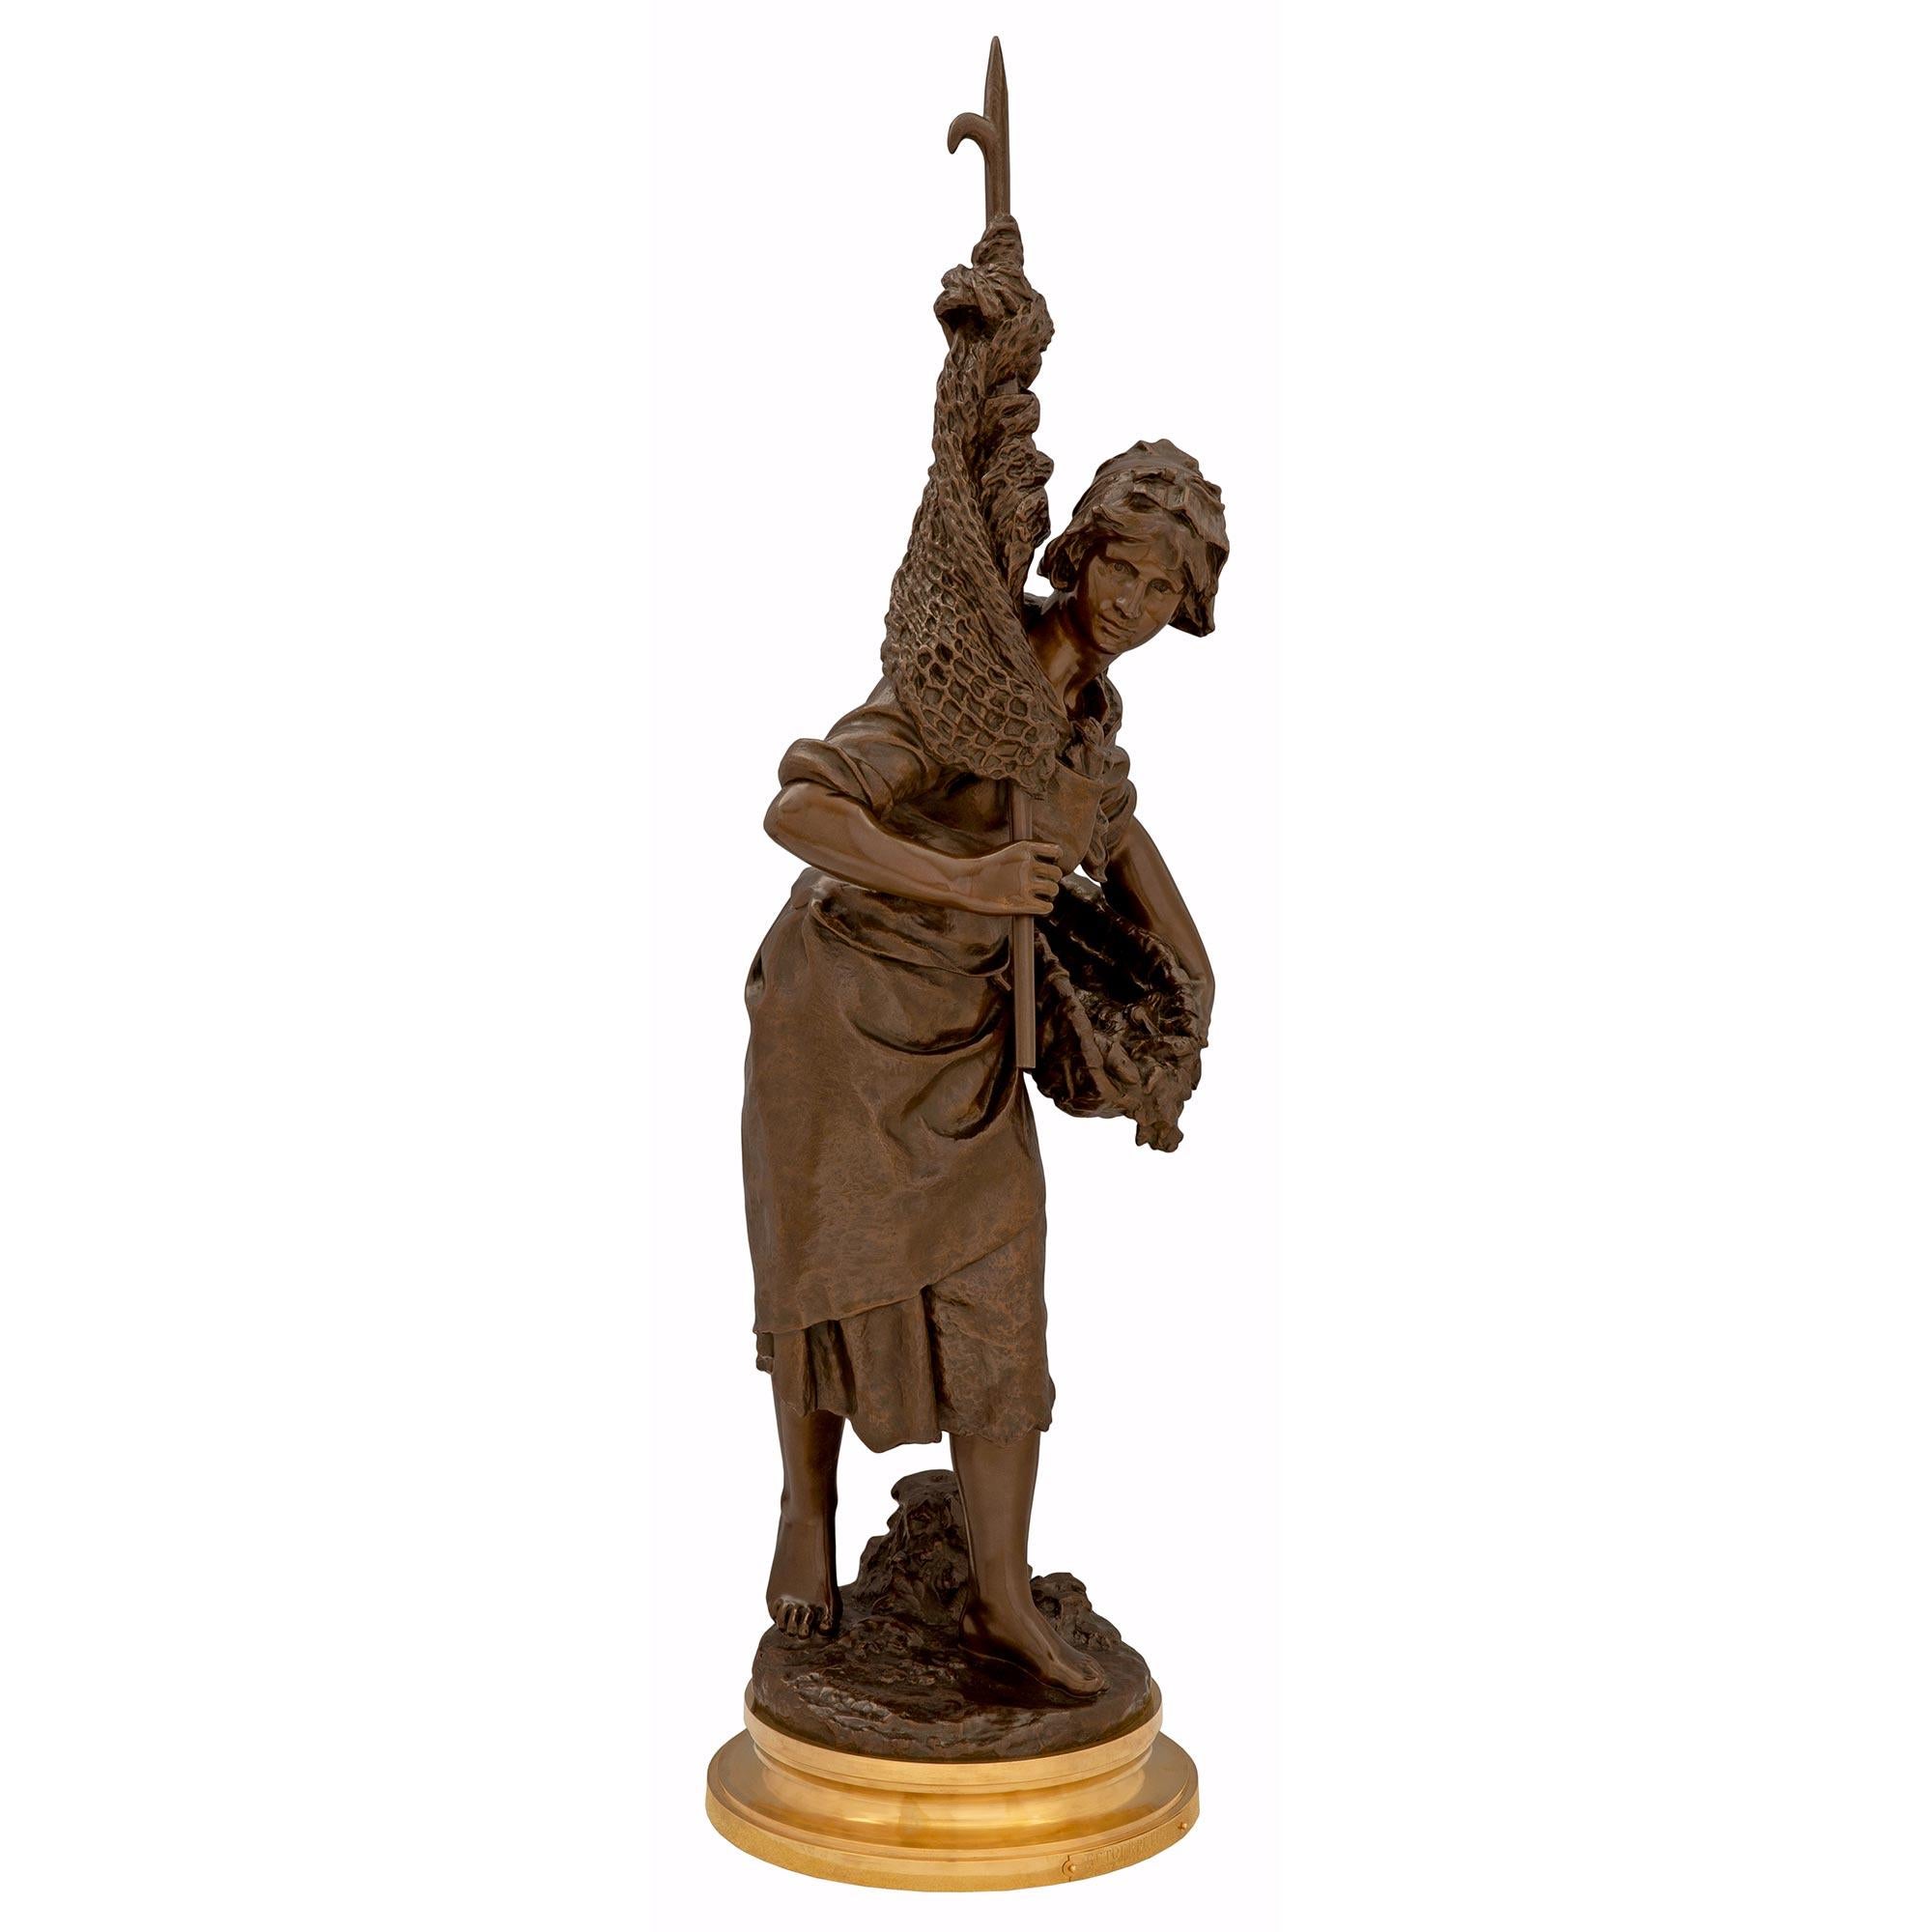 An exceptional French 19th century ormolu and patinated bronze statue titled 